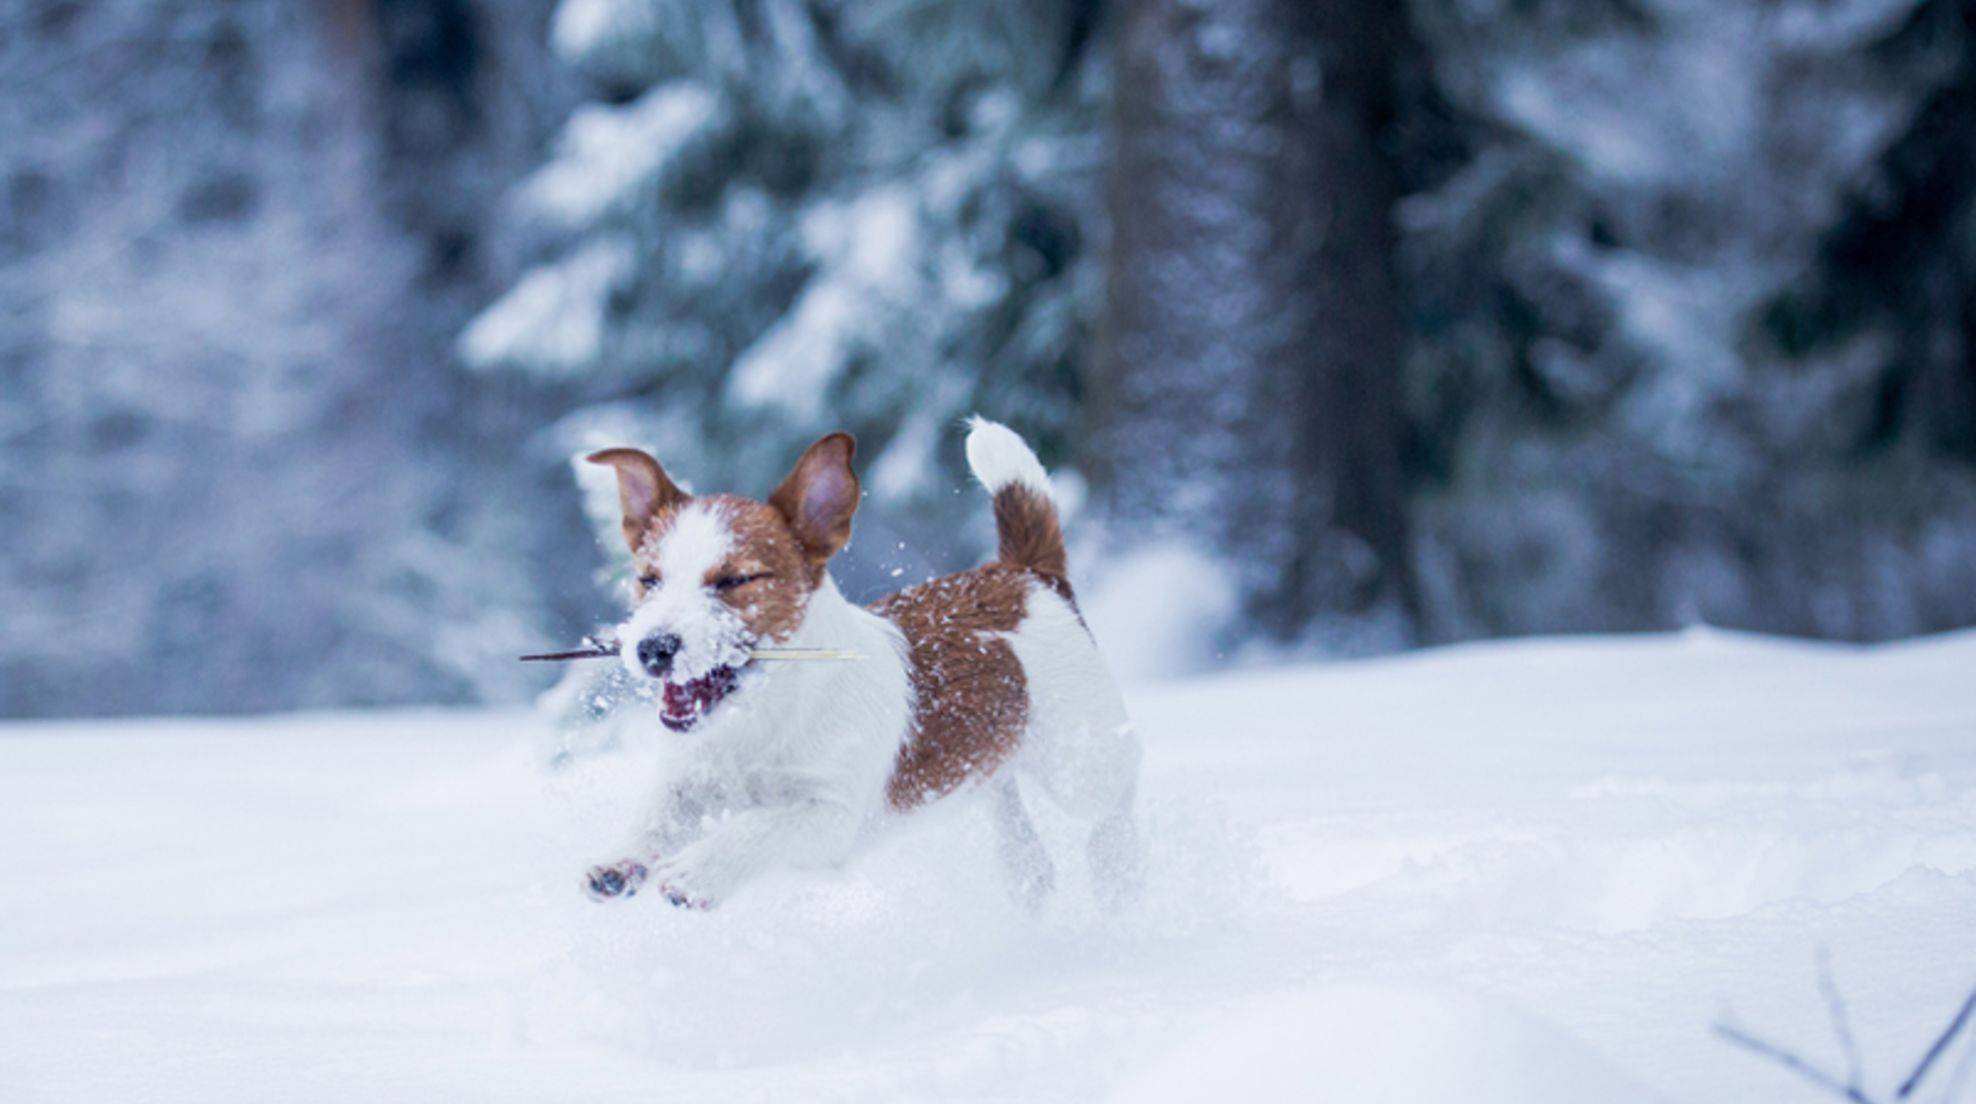 Winter vacation with dog: On into the snow fun